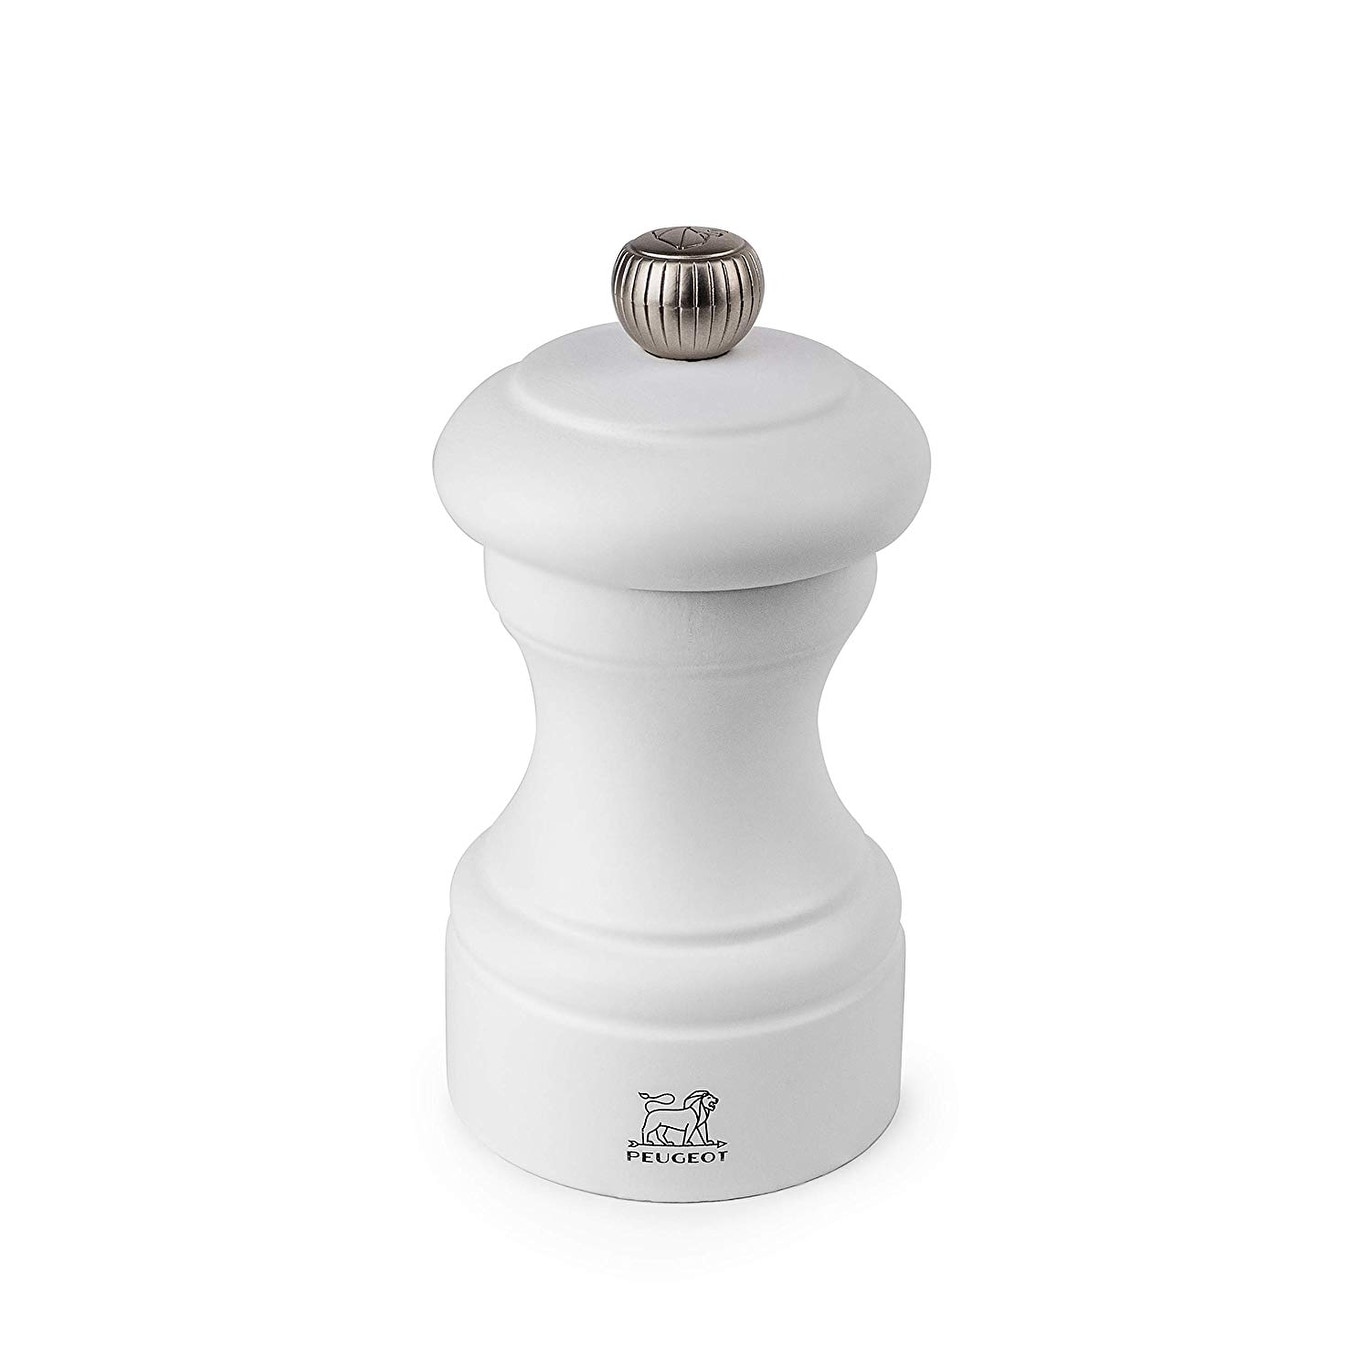 https://ak1.ostkcdn.com/images/products/is/images/direct/0ae9fc0172eabf58aea1543929bf47125ba7d808/Peugeot-24215-Bistro-4-Inch-Pepper-Mill%2C-White-Matte.jpg